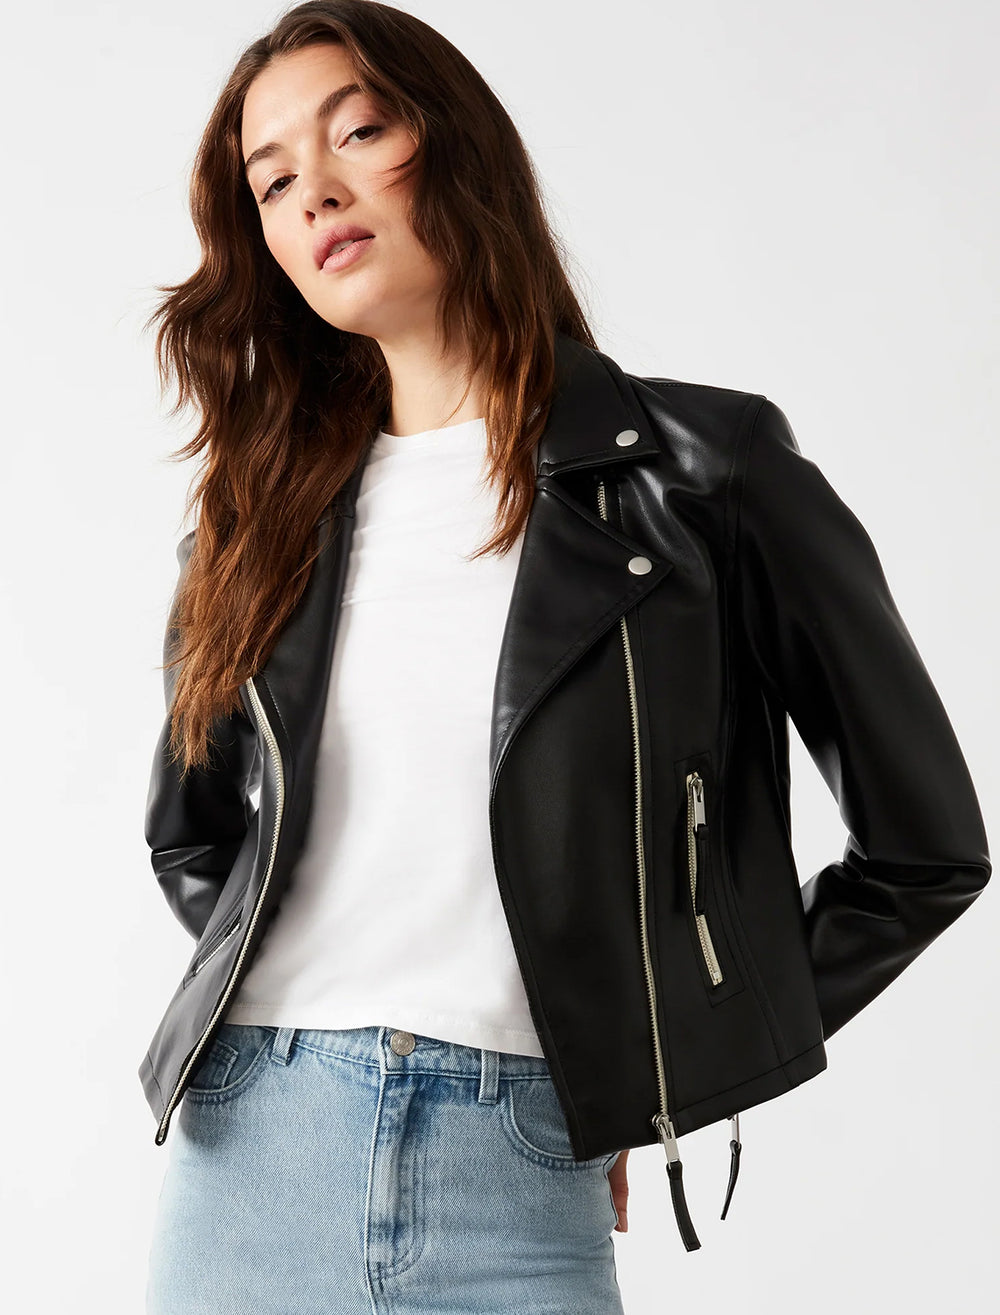 Model wearing Steve Madden's vinka jacket in black with a white tee and blue jeans.